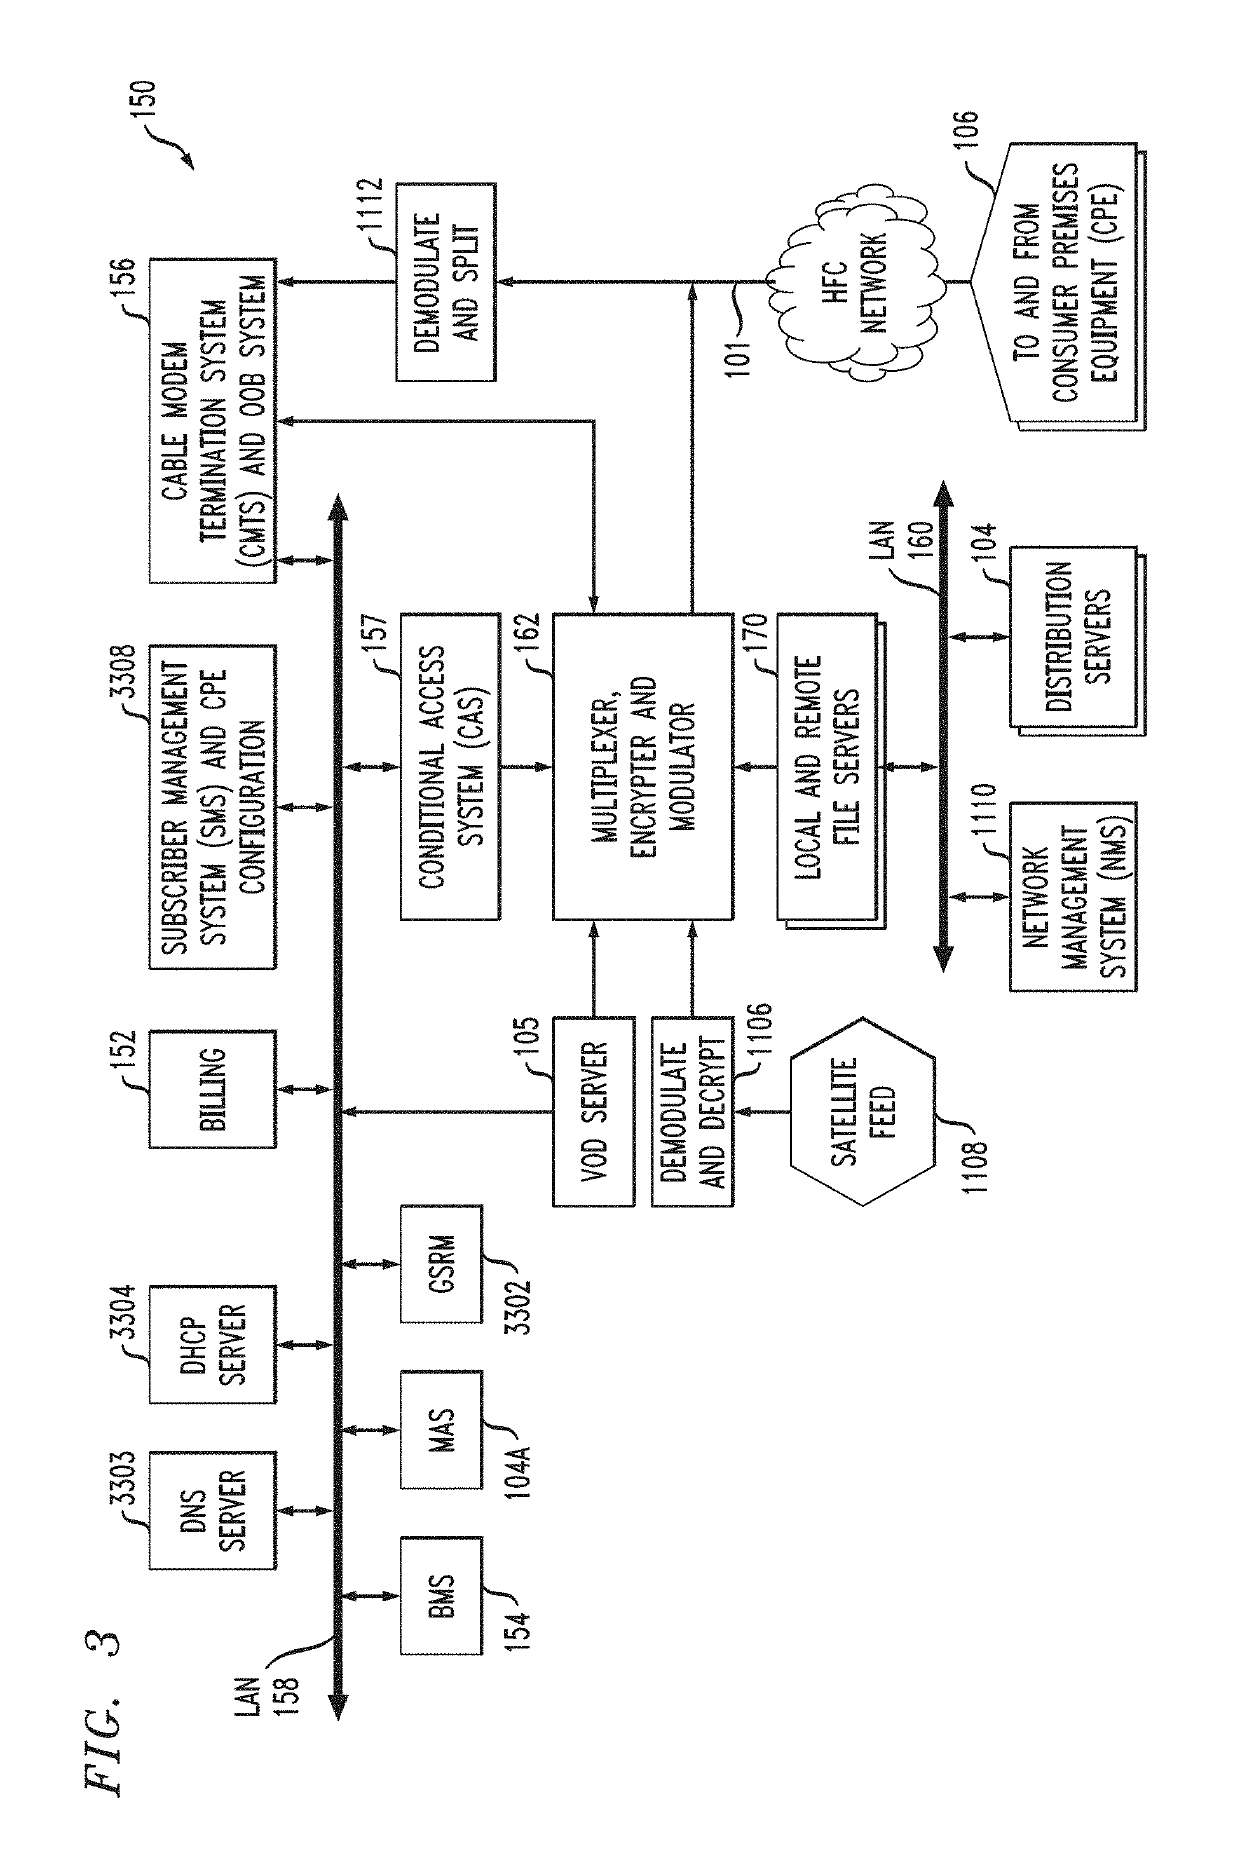 Bi-directional speed test method and system for customer premises equipment (CPE) devices